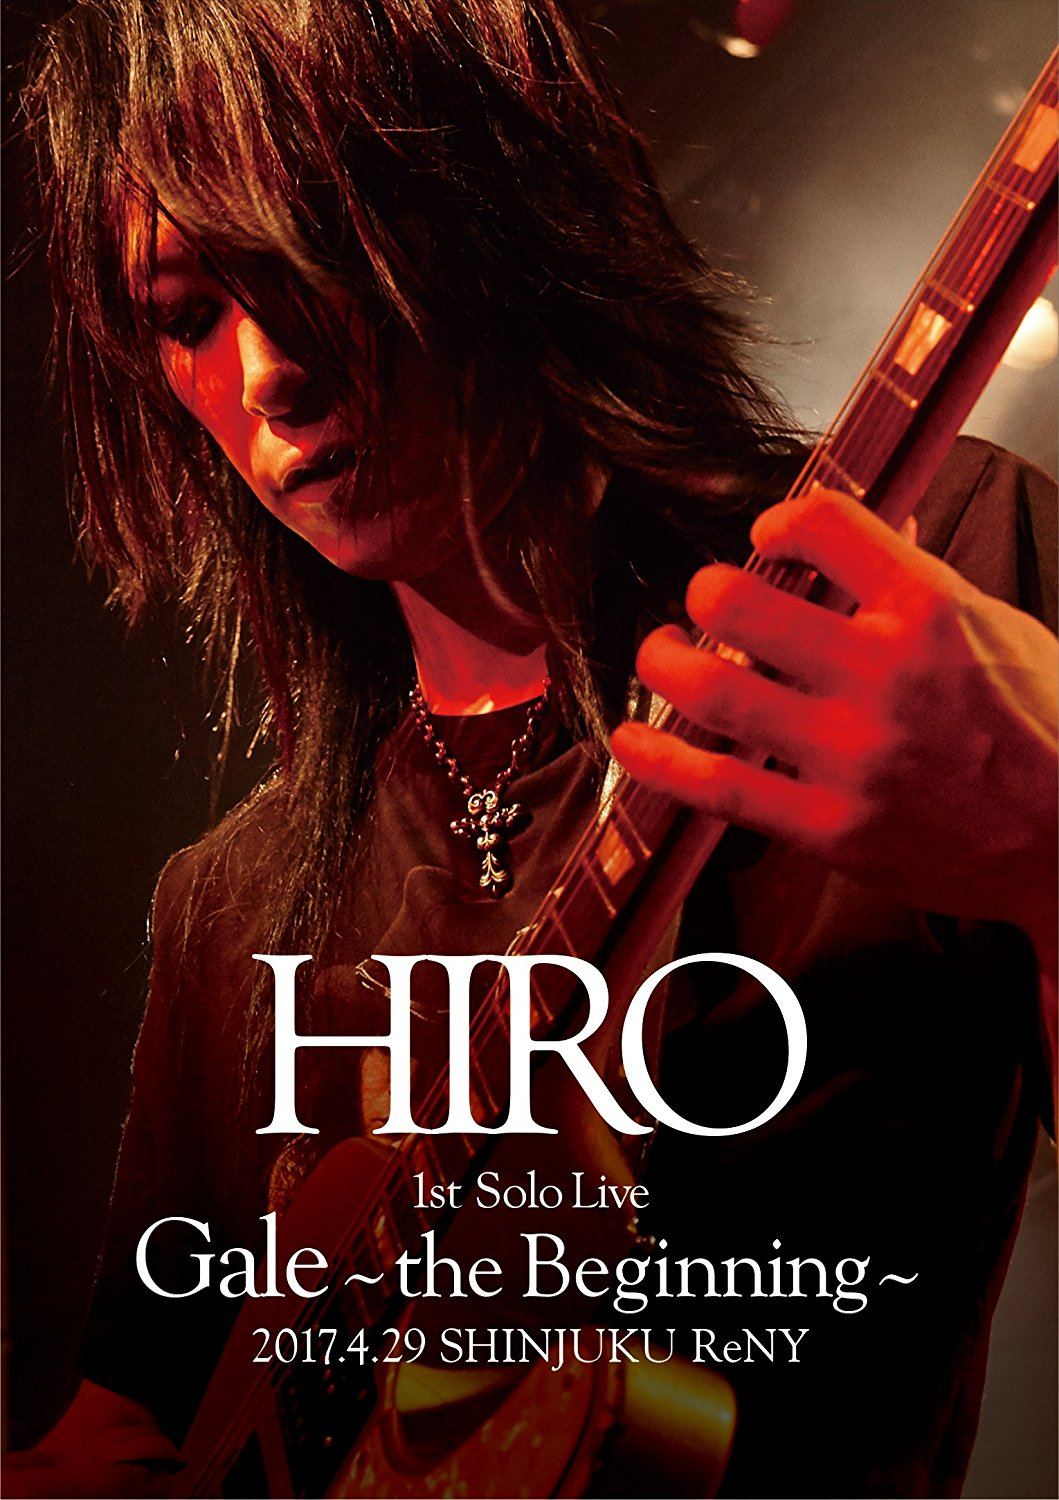 Hiro 1st Solo Live Gale - The Beginning - 2017.4.29 Shinjuku Reny  [Blu-ray+2CD Limited Edition] - Bitcoin & Lightning accepted